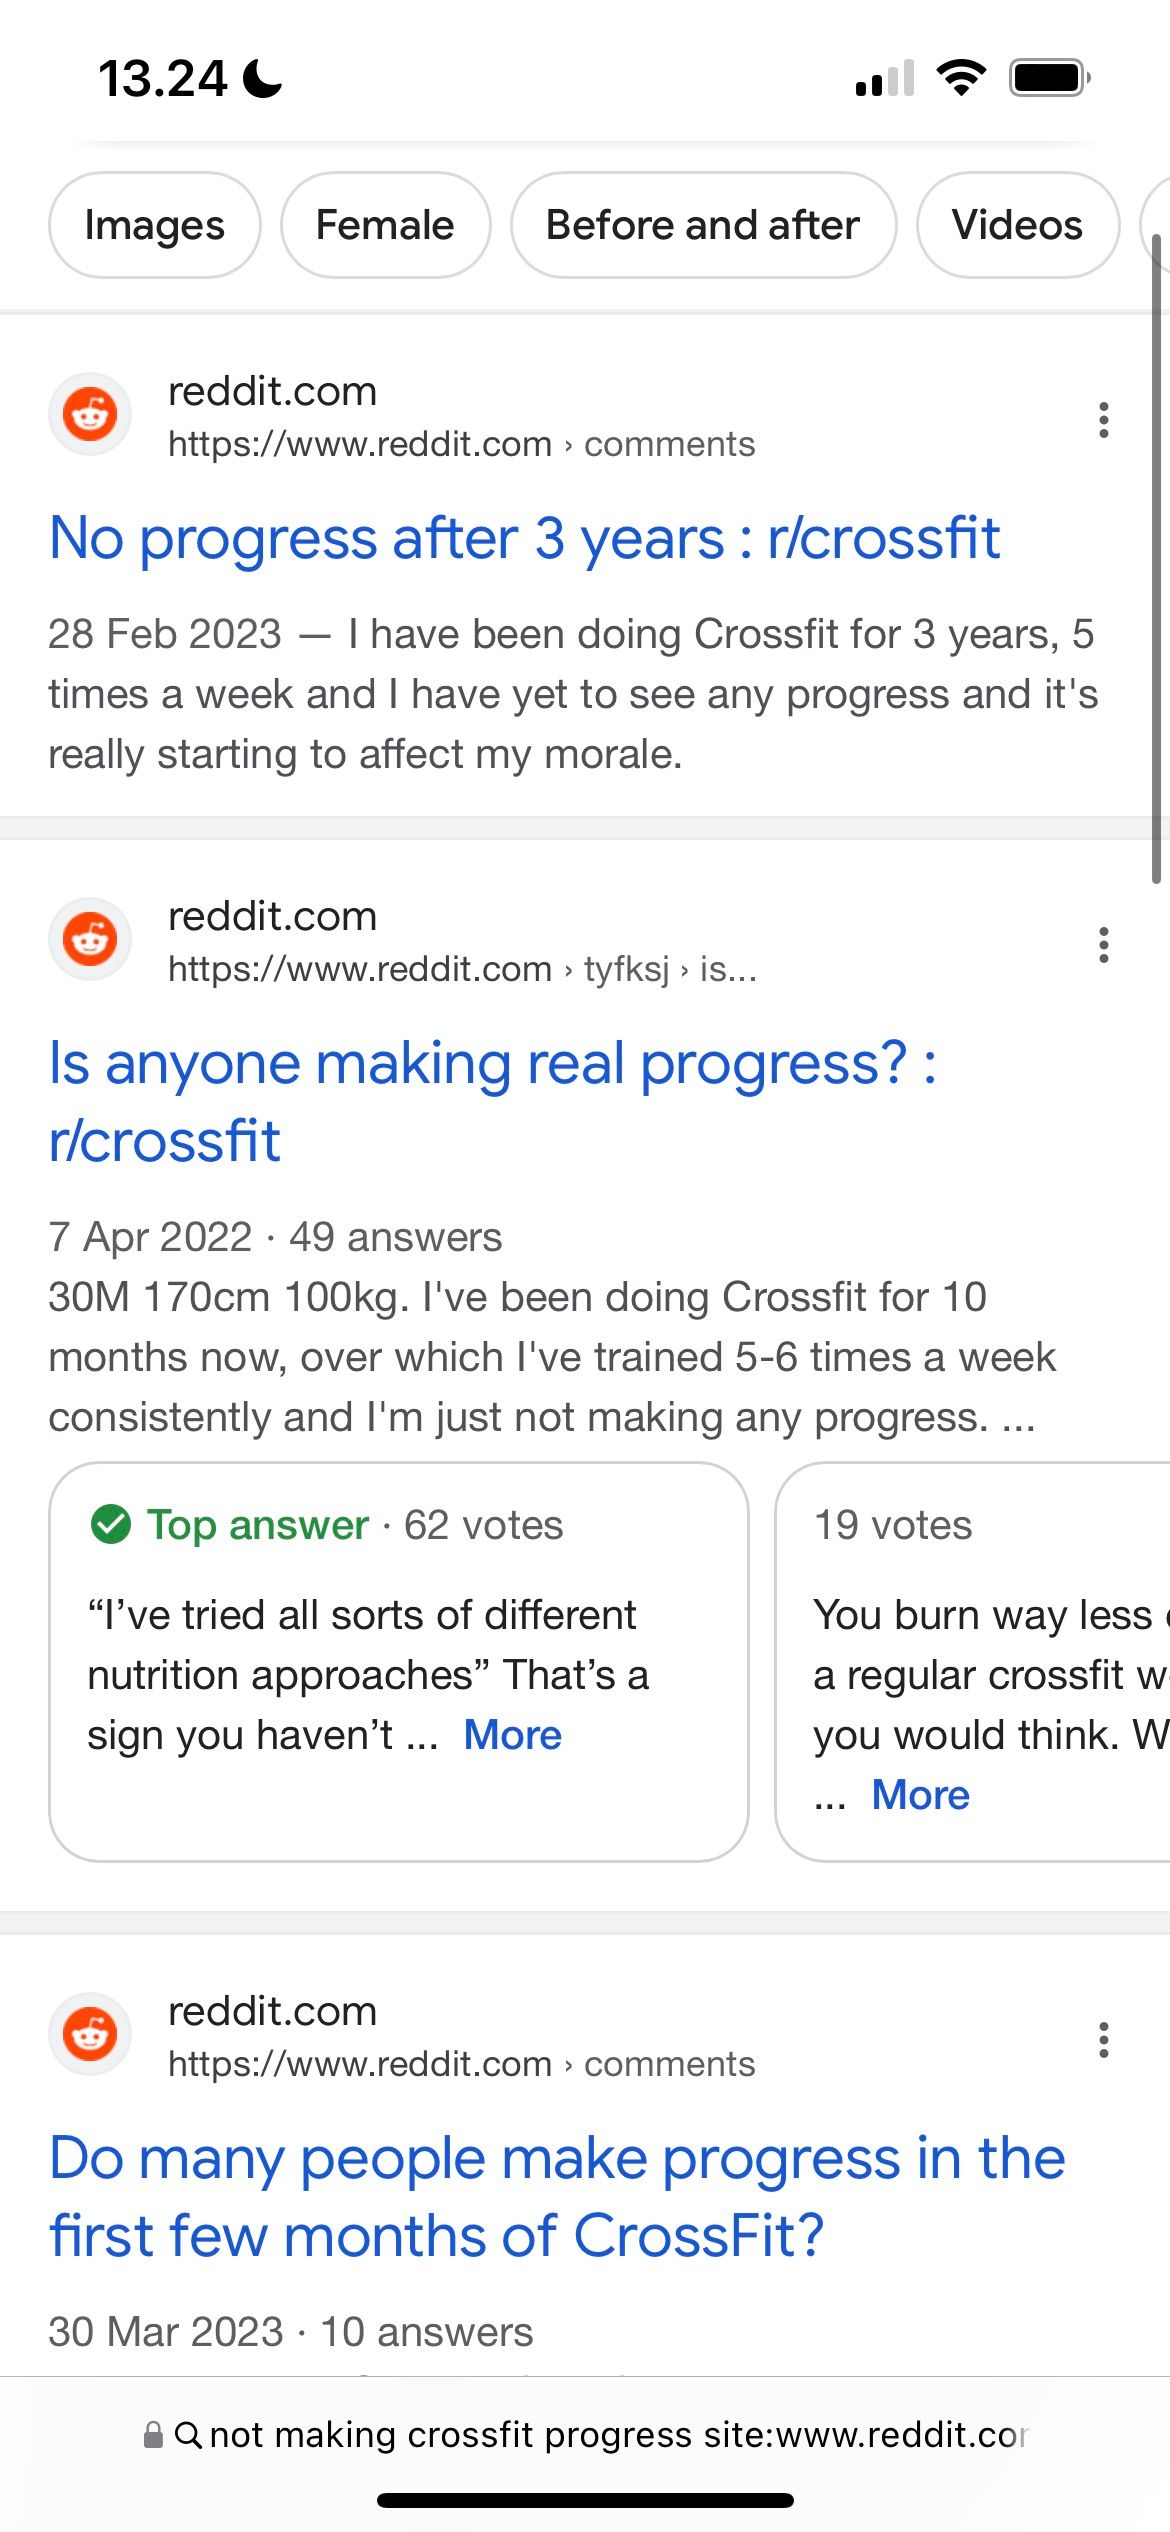 Reddit threads appearing in Google 